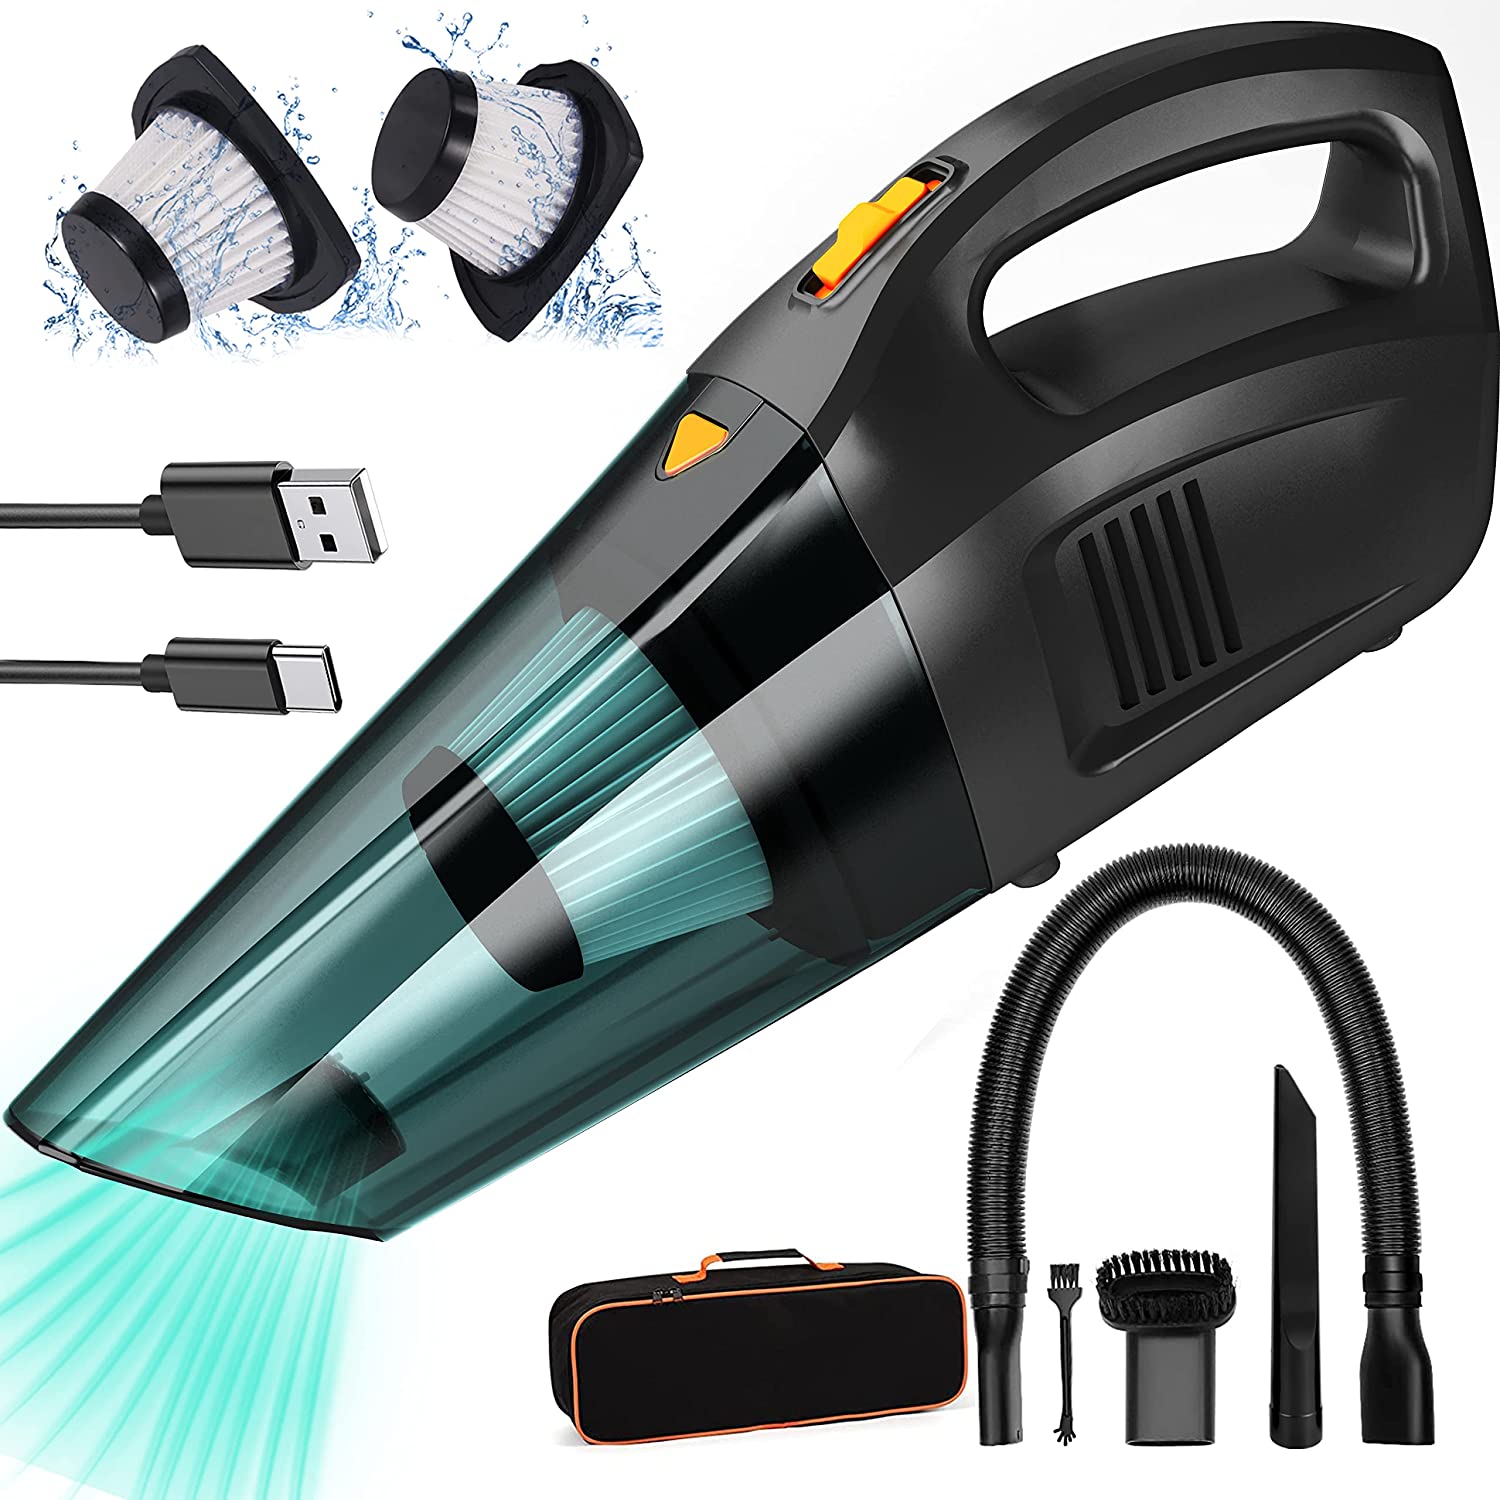 Portable 120w 2200mah Cordless Hand Vacuum Cleaner With Wet & Dry Function  Washable Hepa Filter And 5 Rechargeable Nozzles For Home, Office Kit